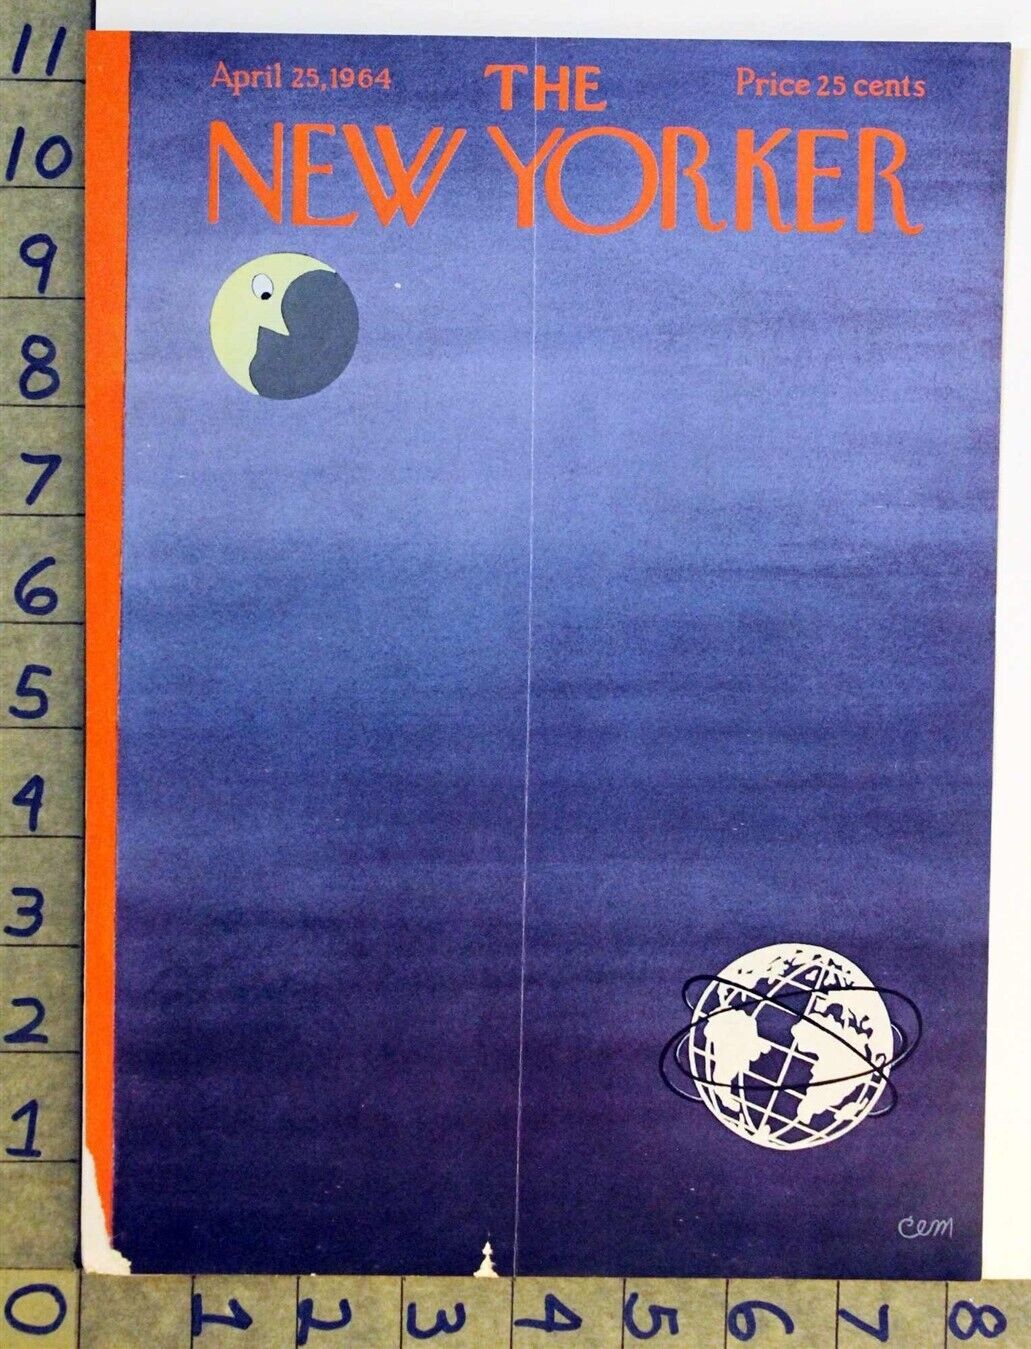 1964 EARTH MOON ORBIT ASTRONOMY SPACE MARTIN ARTIST NEW YORKER COVER FC1242 